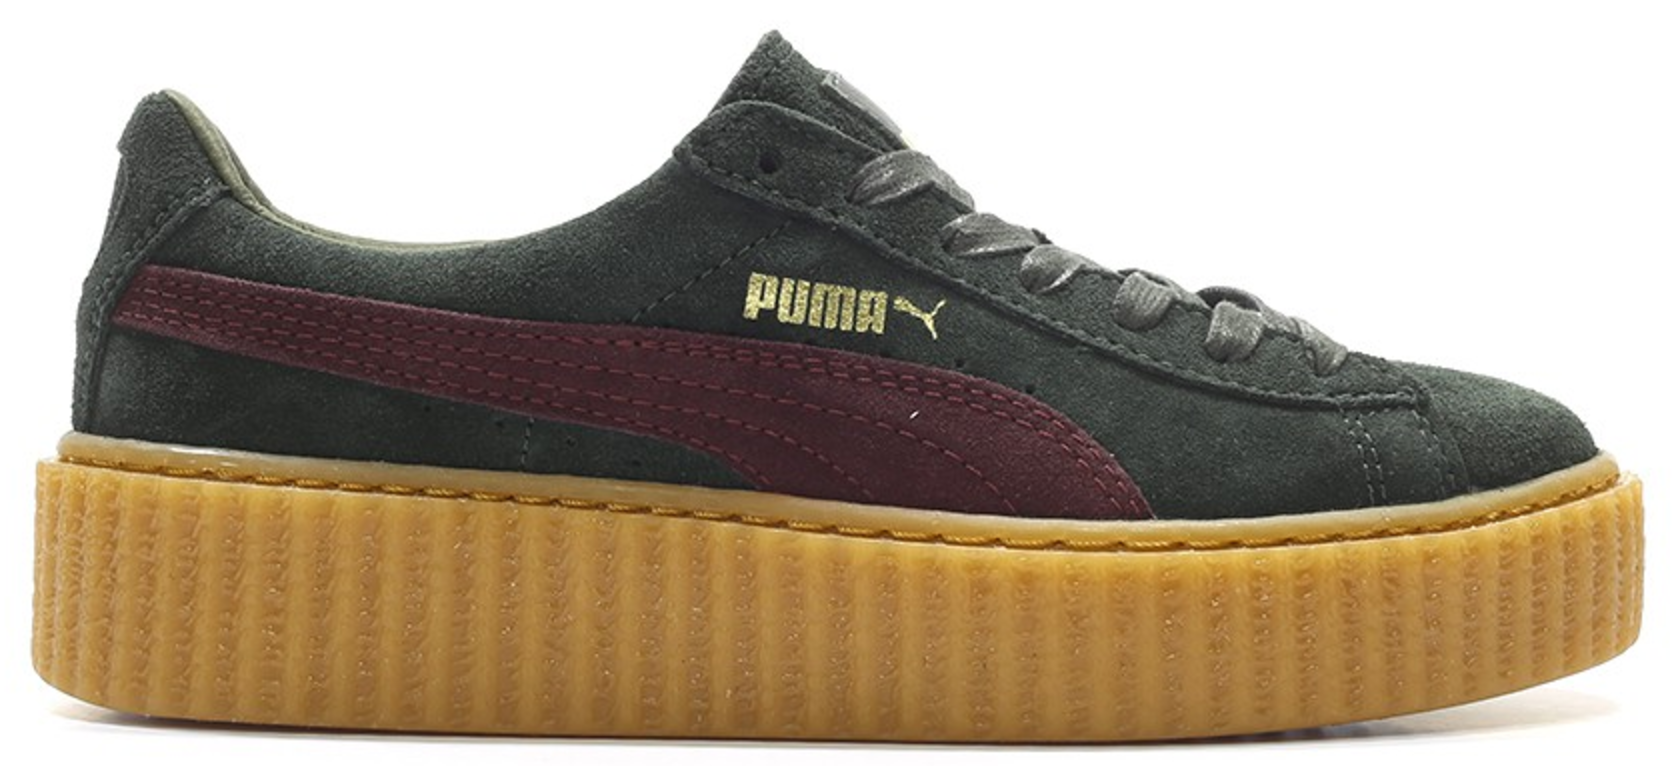 puma creepers blue and green